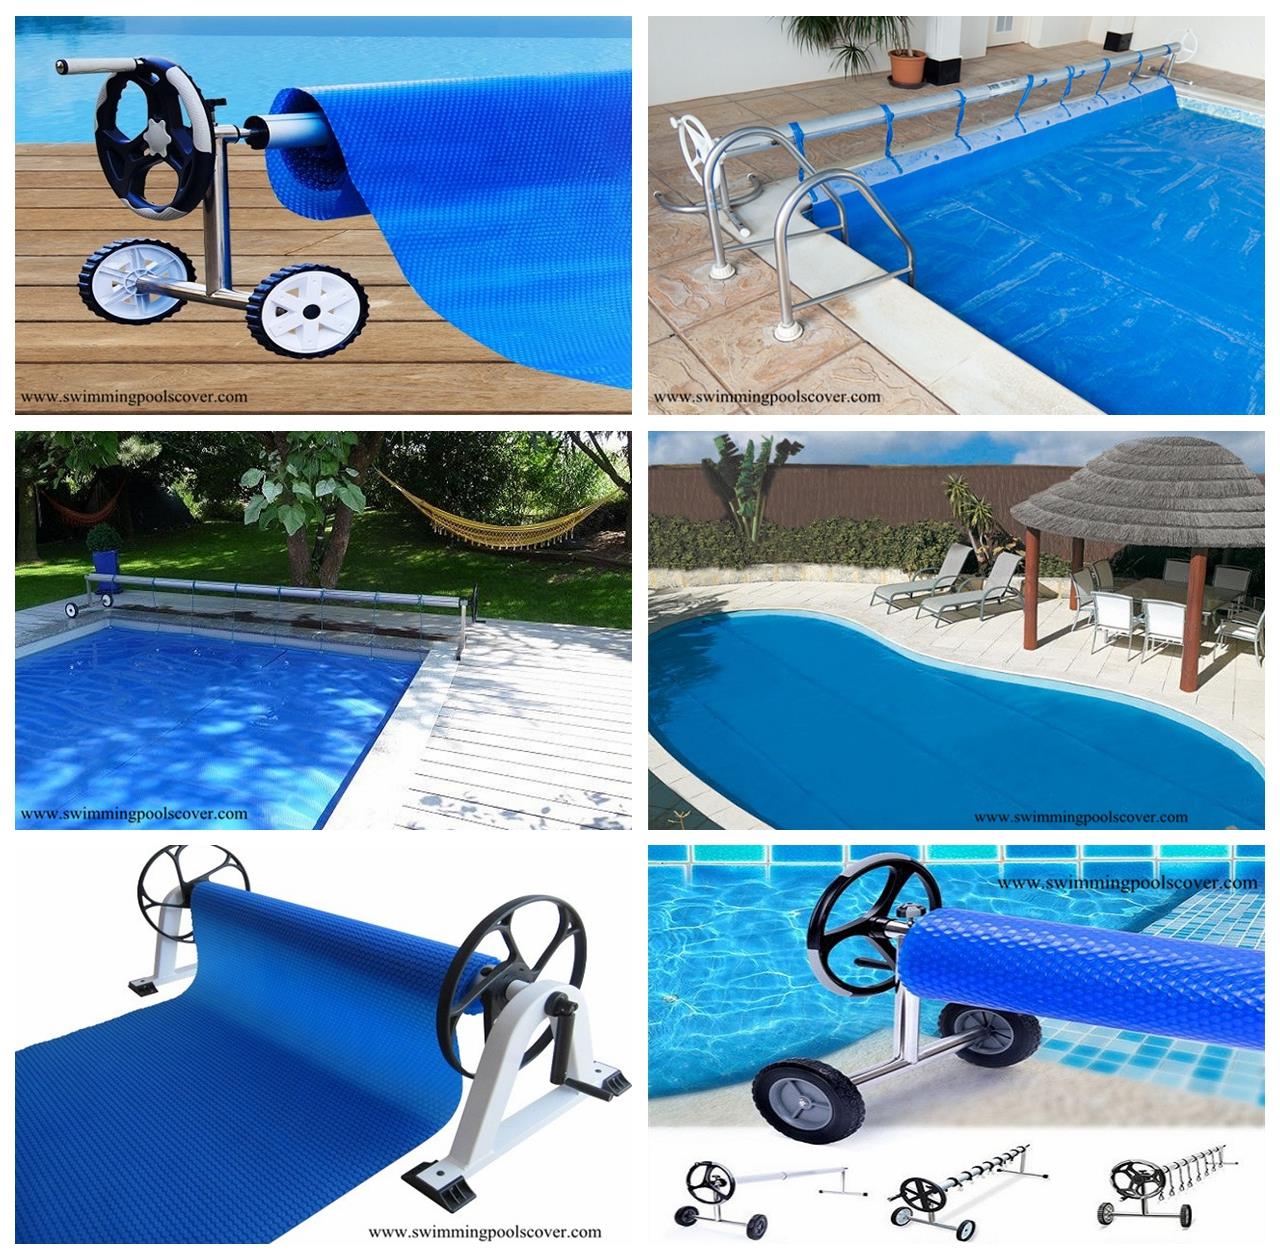 Manual Bubble Swimming Pool Covers Above Ground for Vinyl Pool.jpg